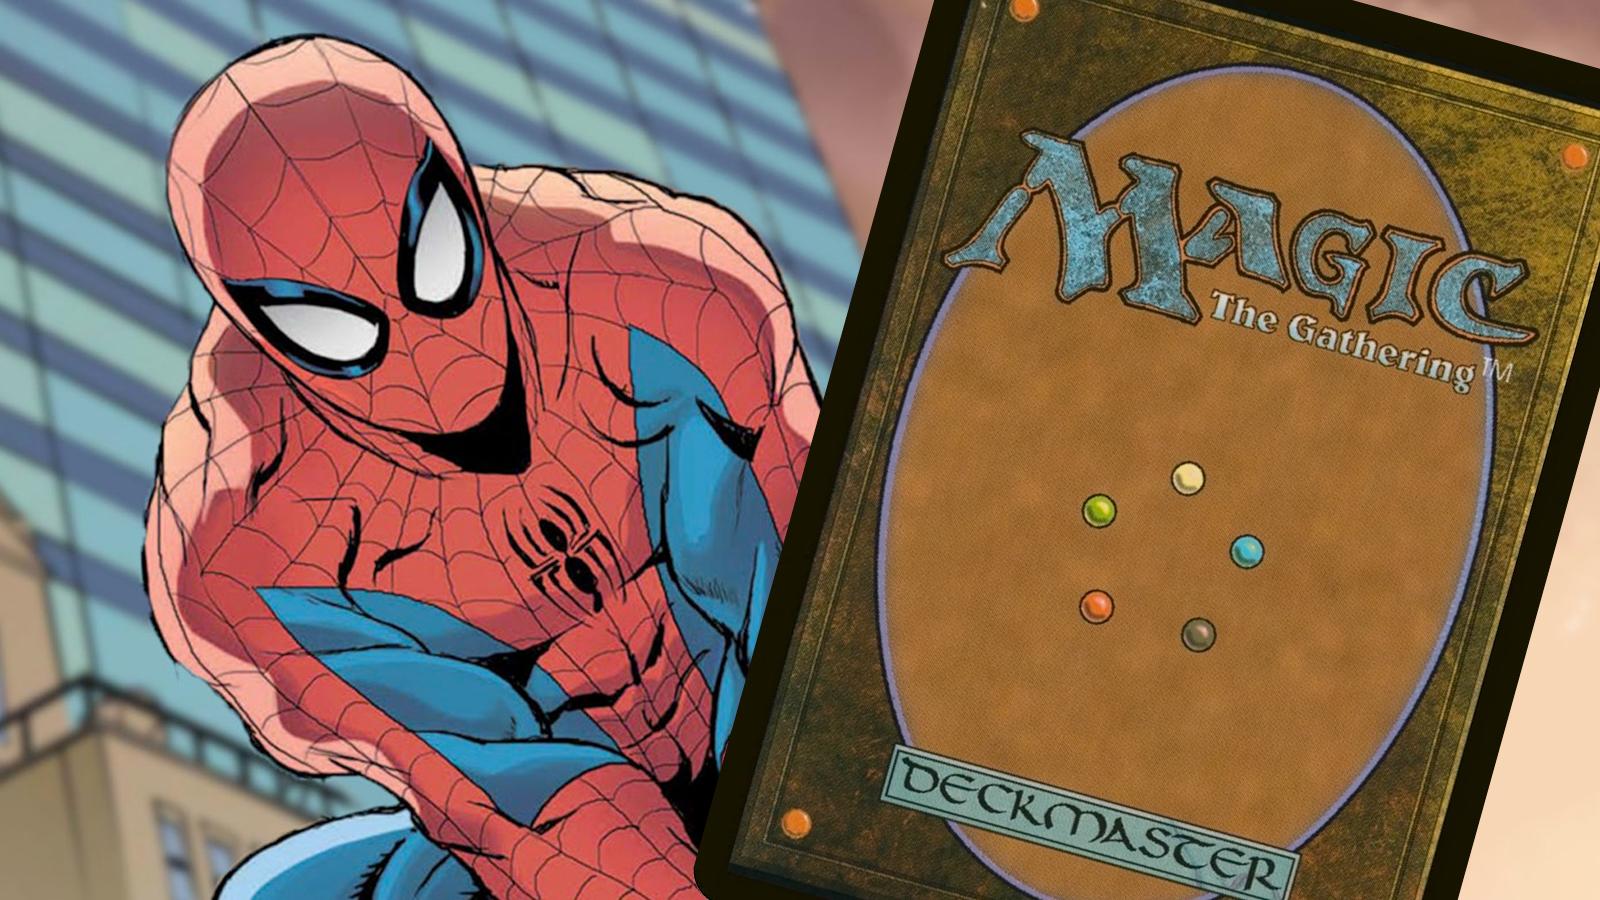 Marvel Crossovers To Magic: The Gathering Universe In 2025